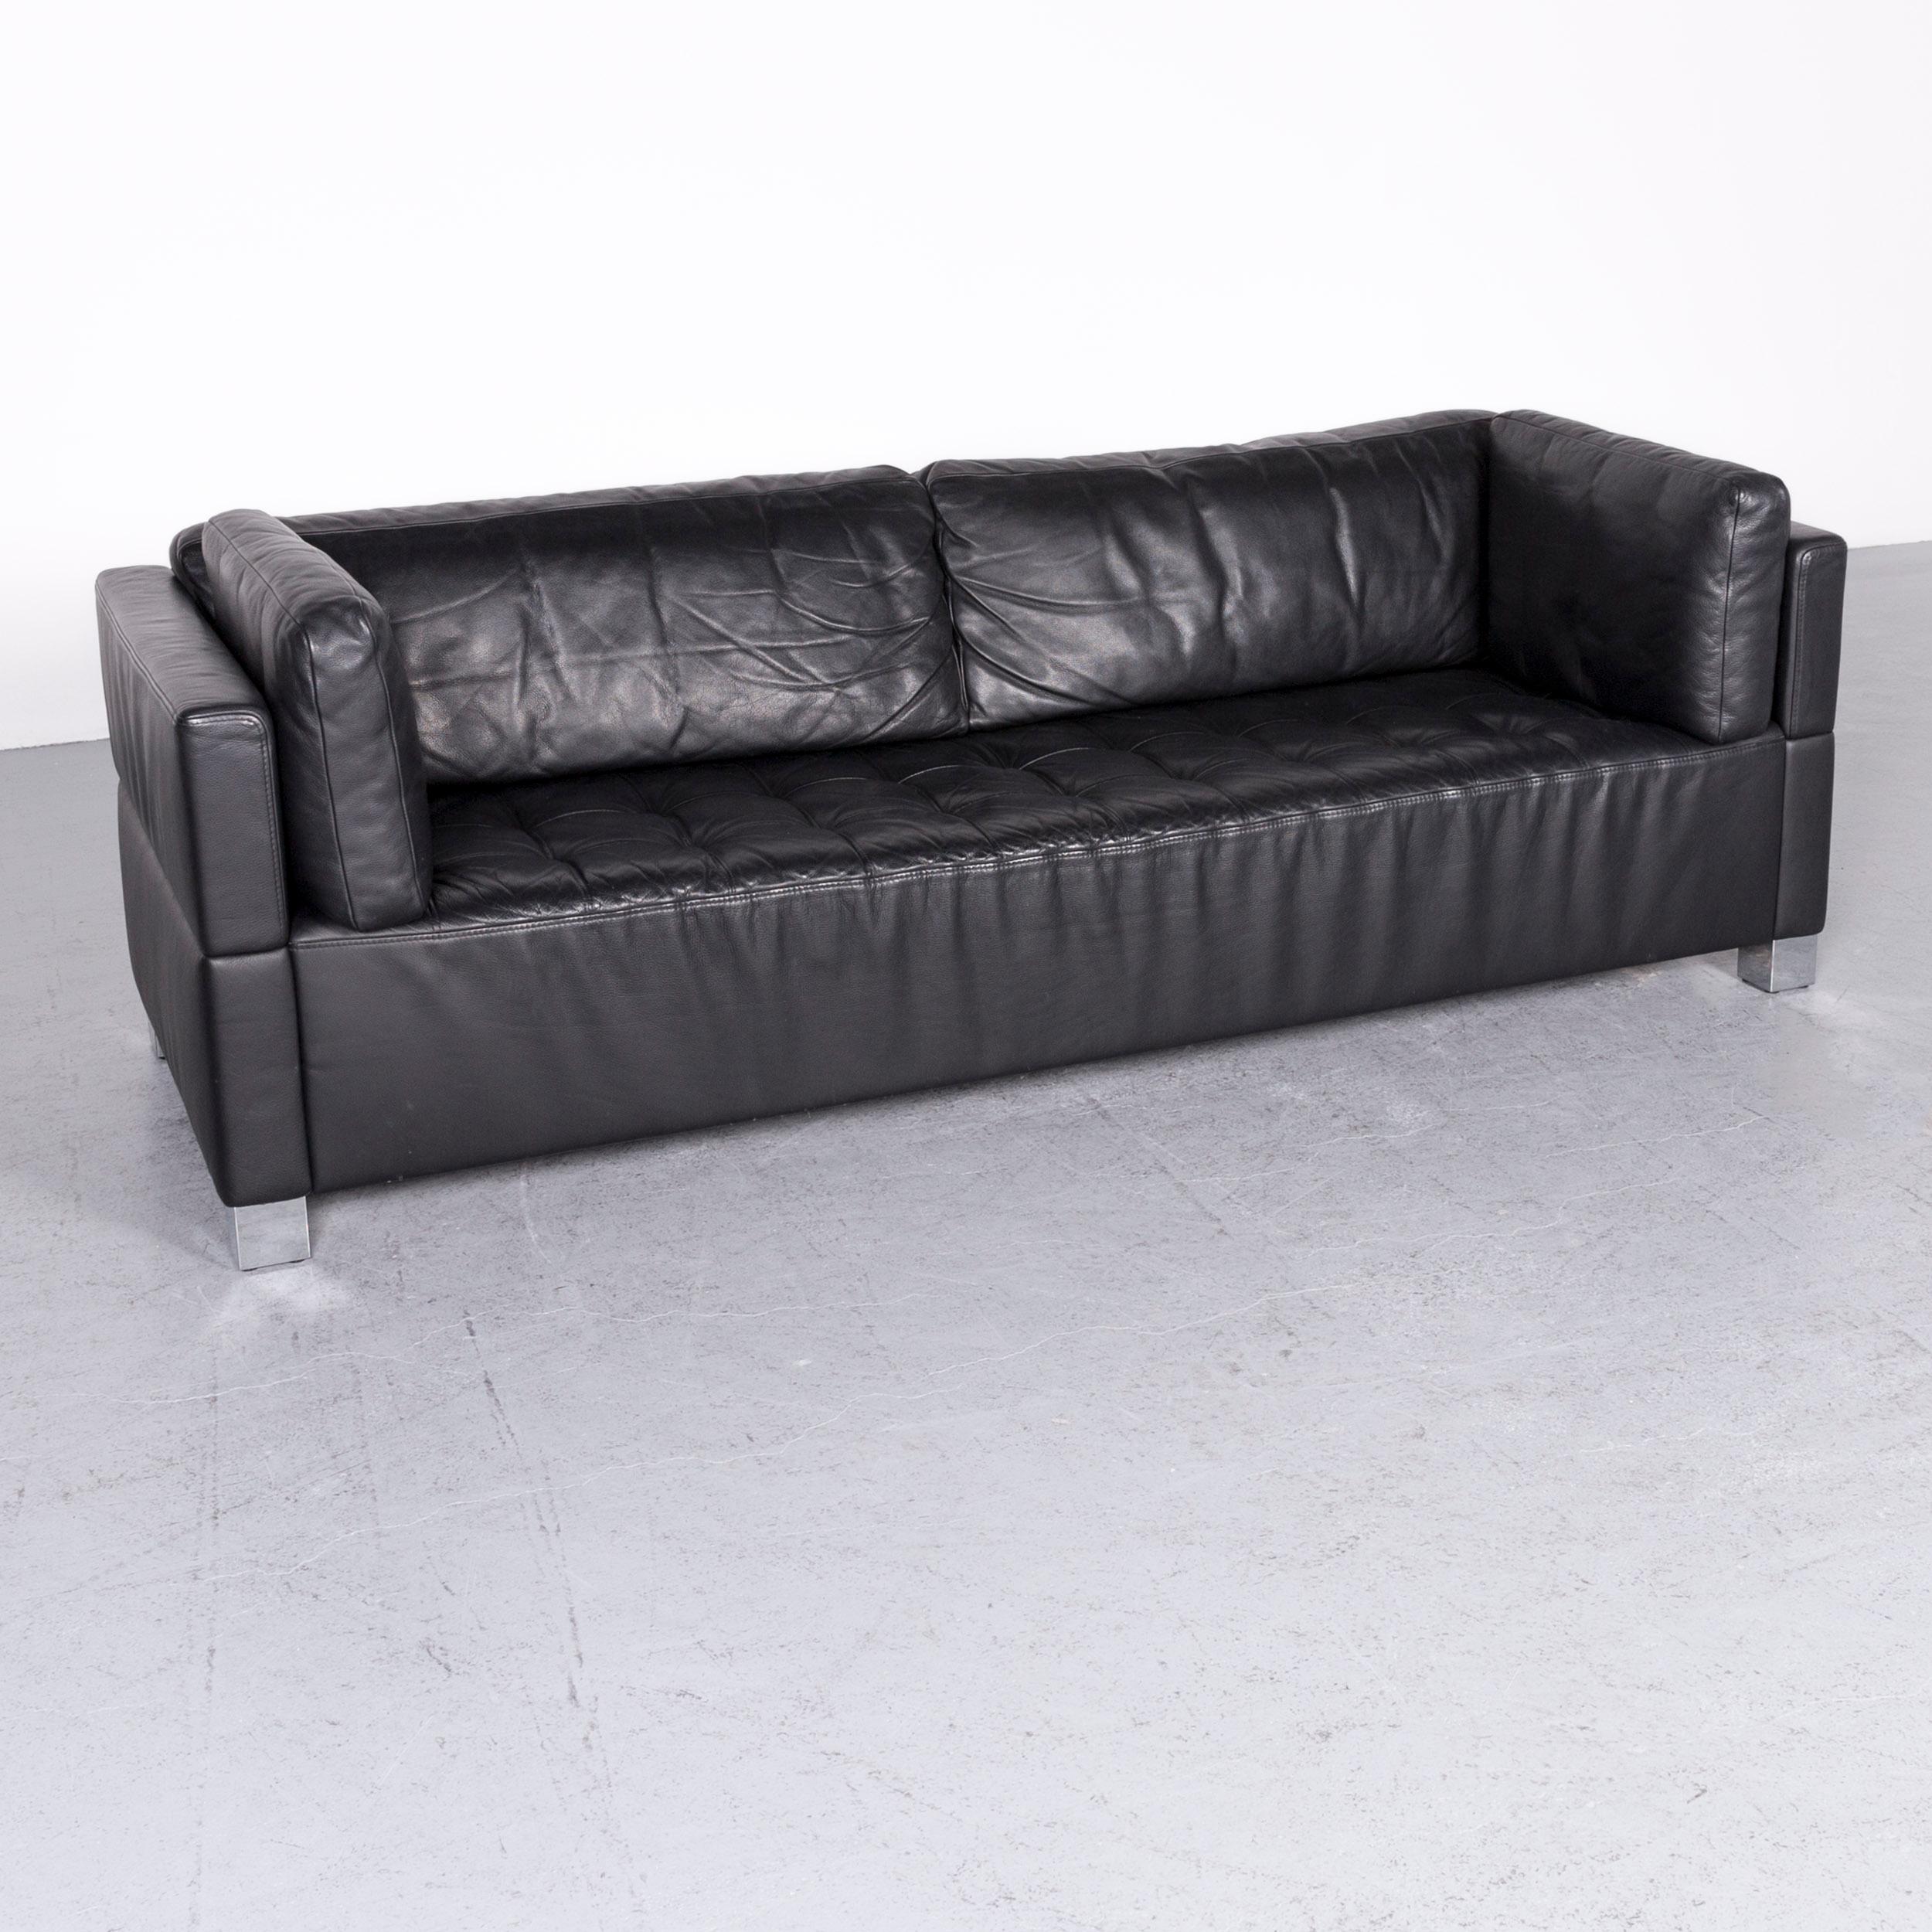 We bring to you a Brühl & Sippold Carrée designer leather sofa black three-seat couch.